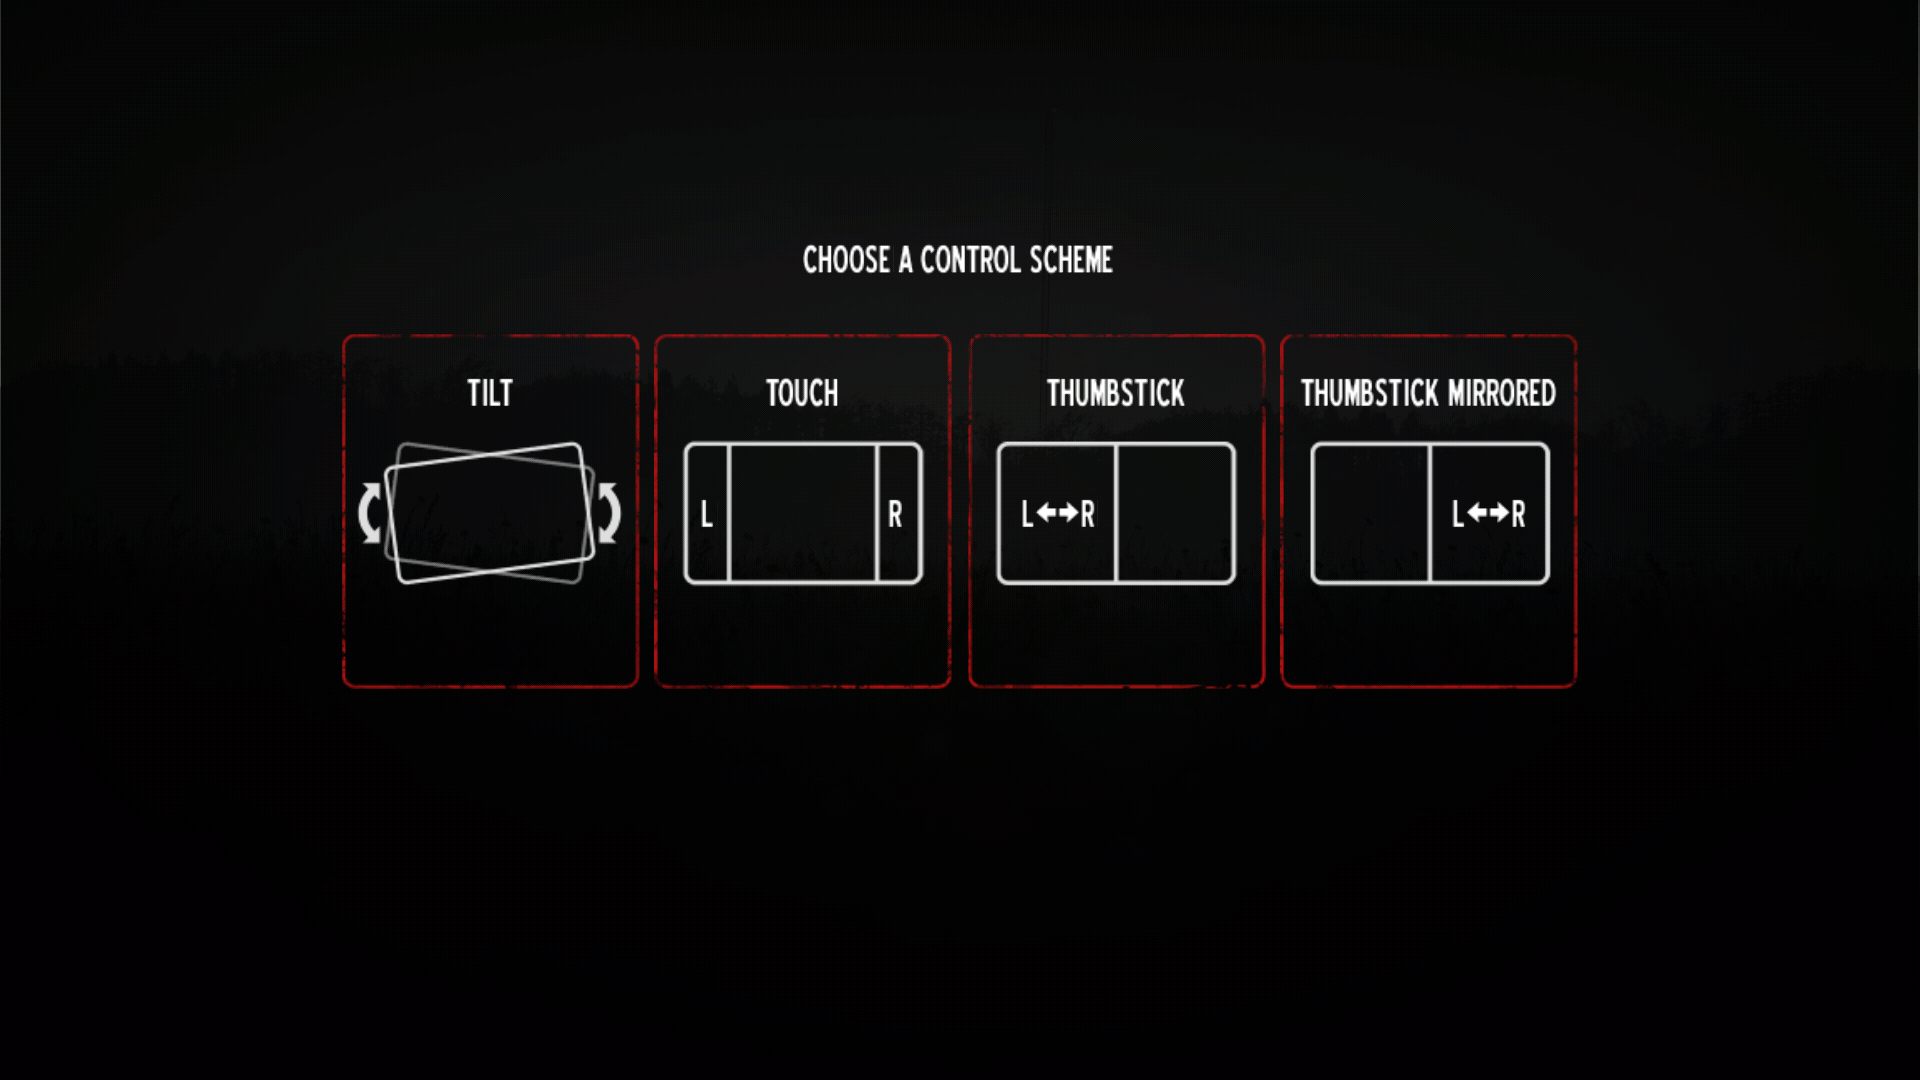 Into the Dead controler presets example for title, left/right buttons, and virtual thumbtack